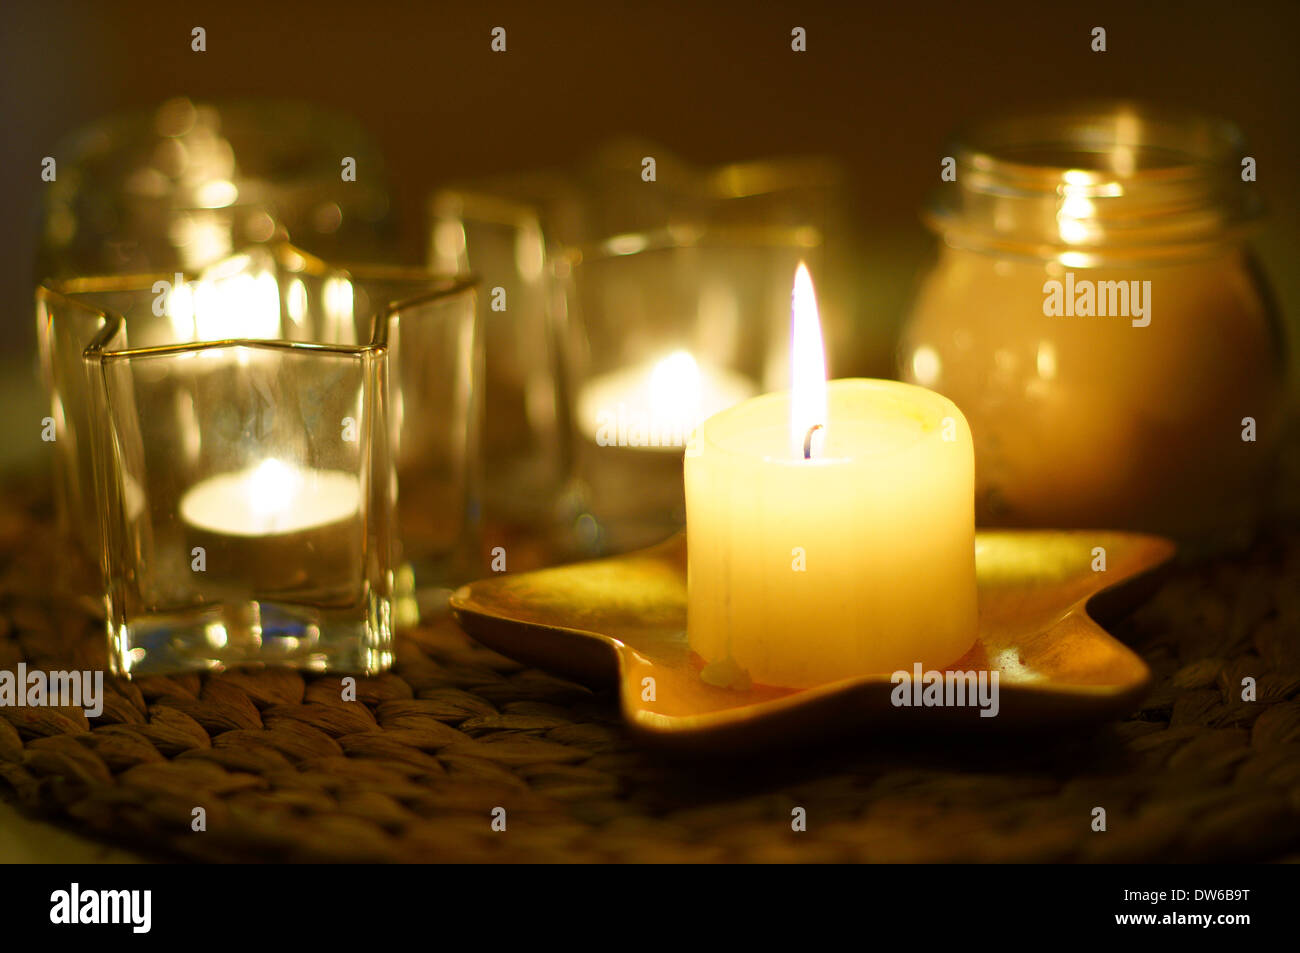 Warm candle light home candles burning Stock Photo